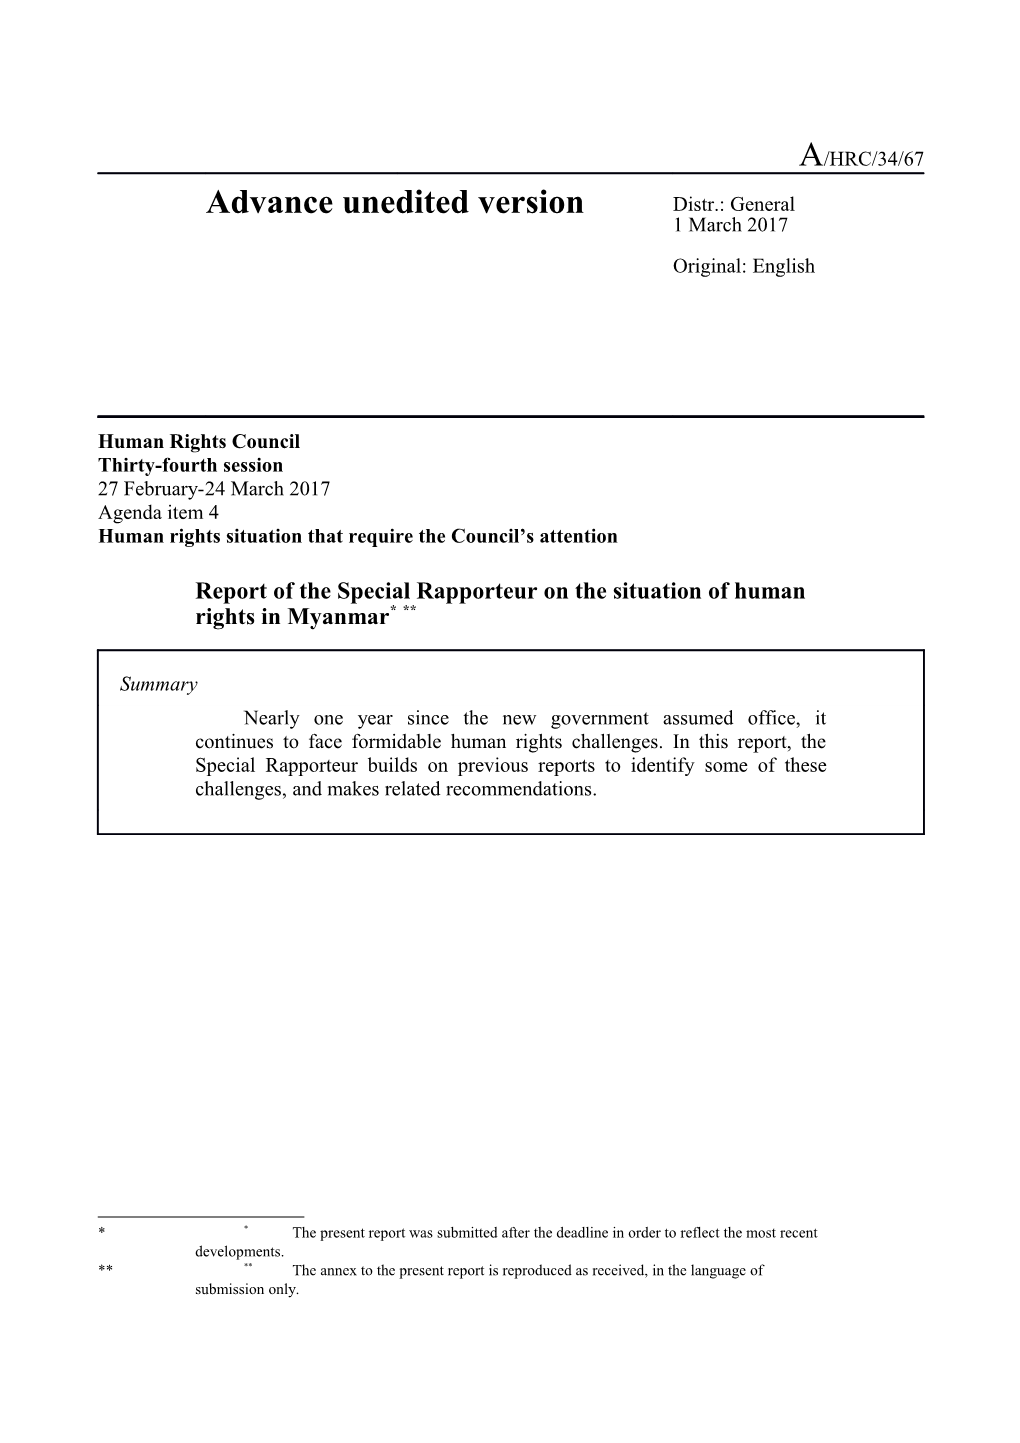 Report of the Special Rapporteur on the Situation of Human Rights in Myanmar, A/HRC/34/67